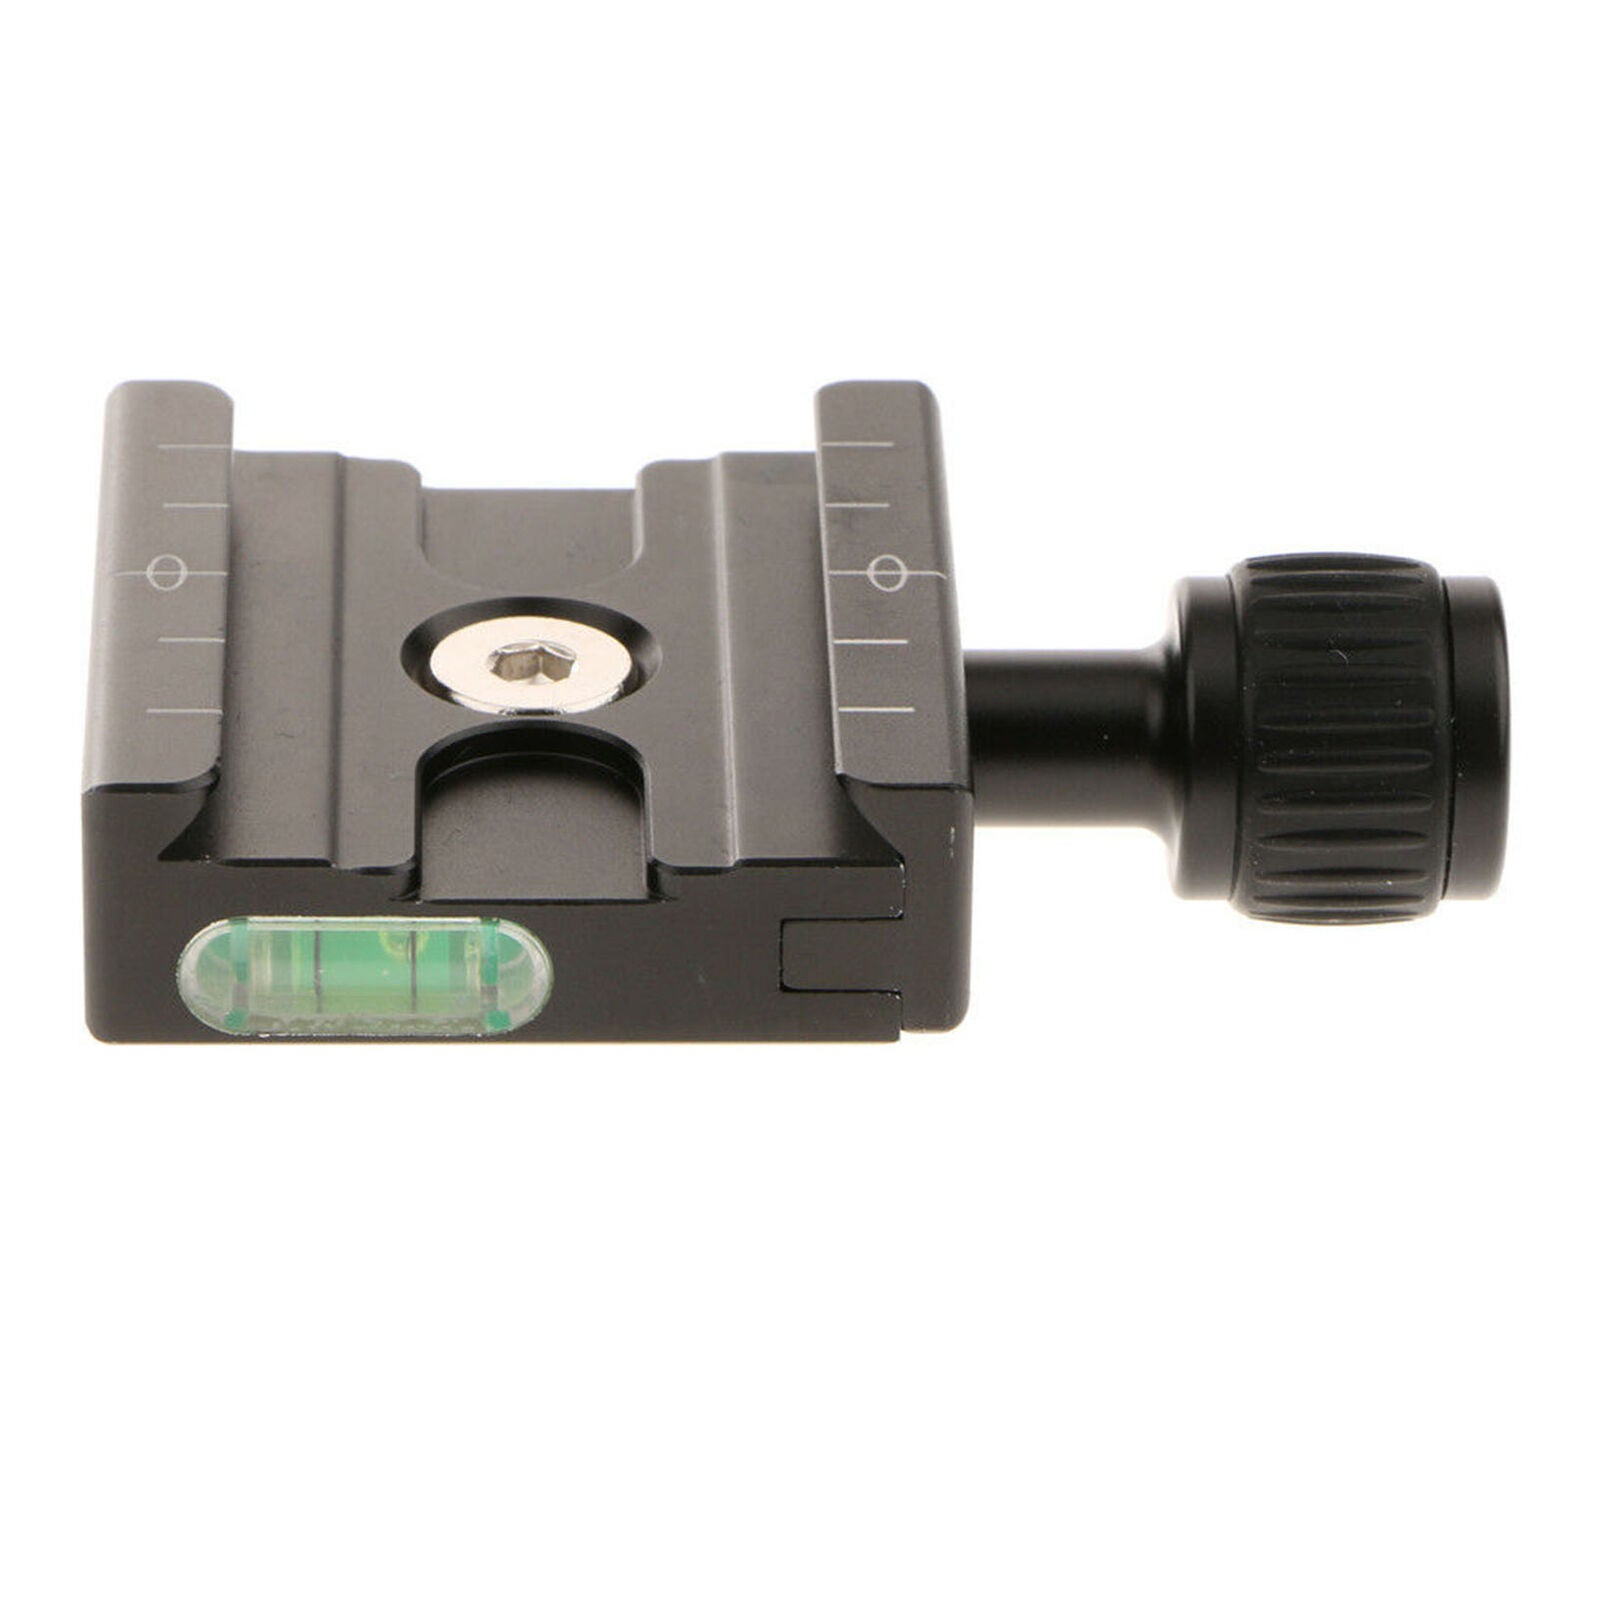 50mm QR Clamp Adapter & Level Arca-Swiss for Tripod Head Quick Release Plate